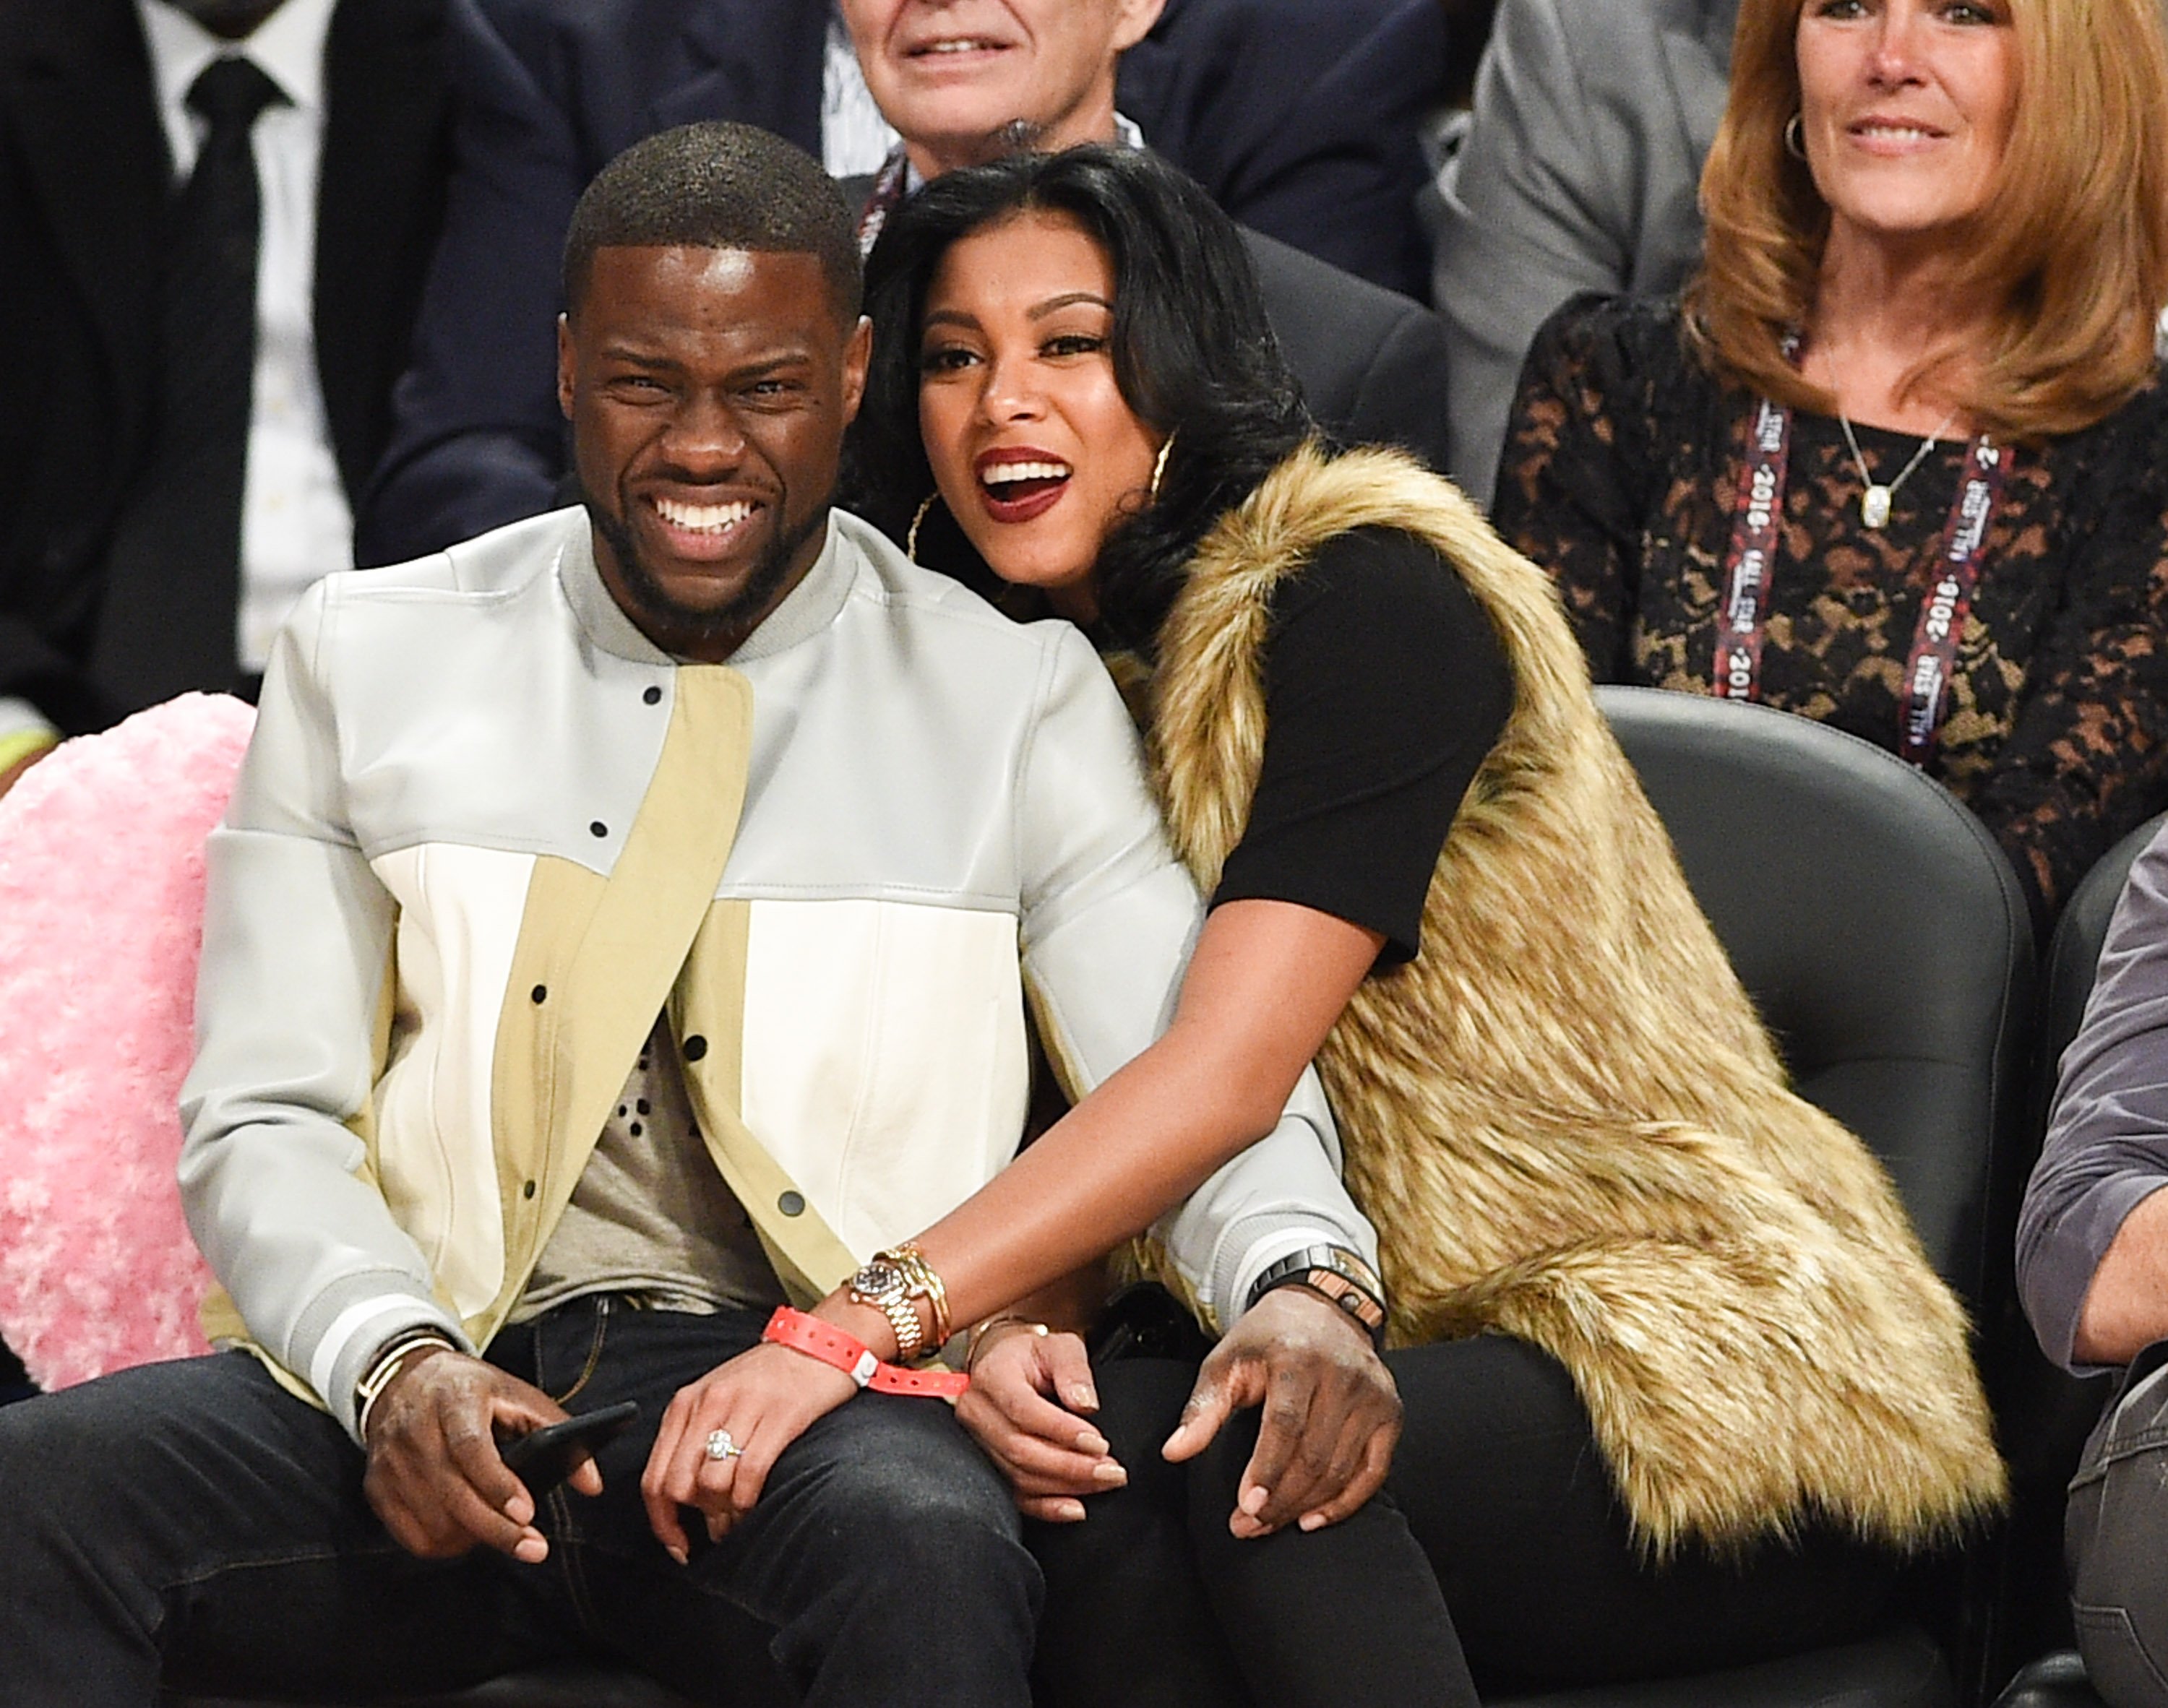 Actor Kevin Hart and Eniko Parrish attend the 2016 NBA All-Star Game at Air Canada Centre on February 14, 2016| Photo: Getty images